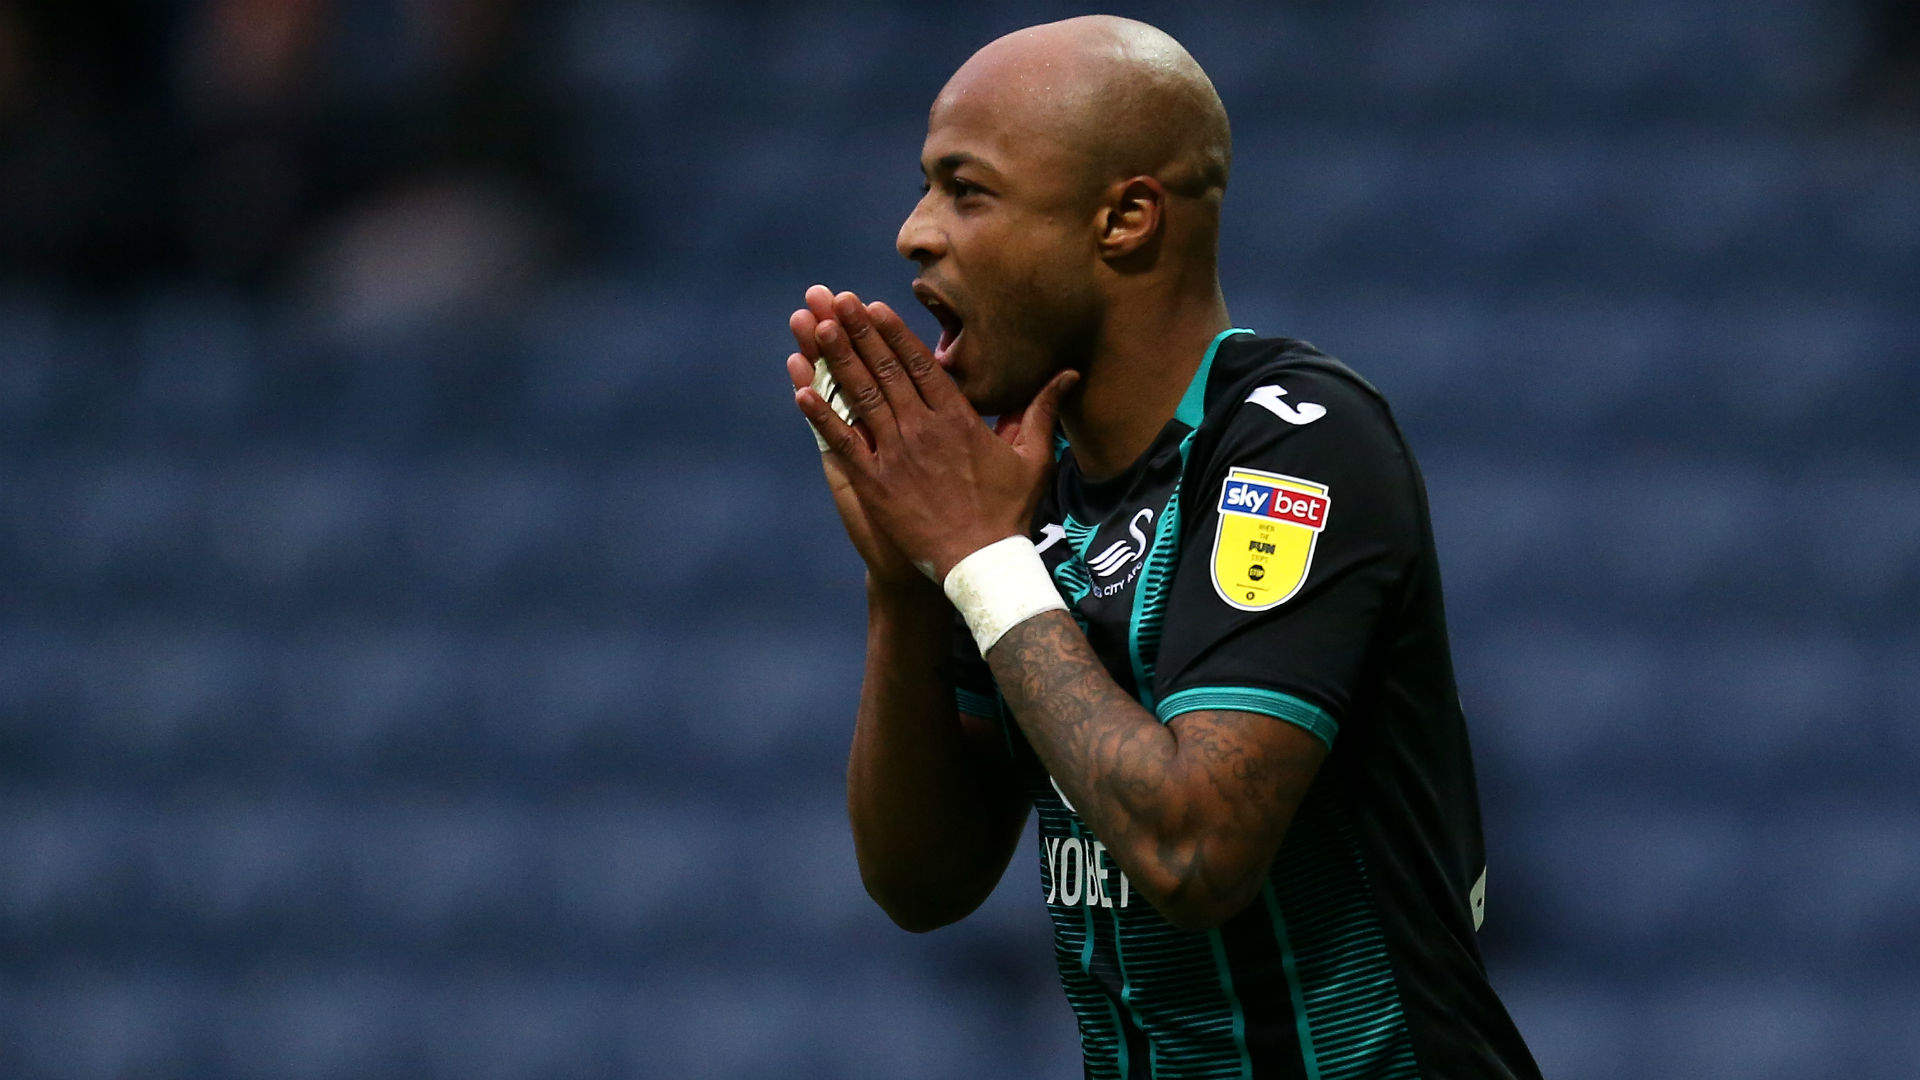 Andre Ayew's promotion hopes end as Benrahma's Brentford beat Swansea